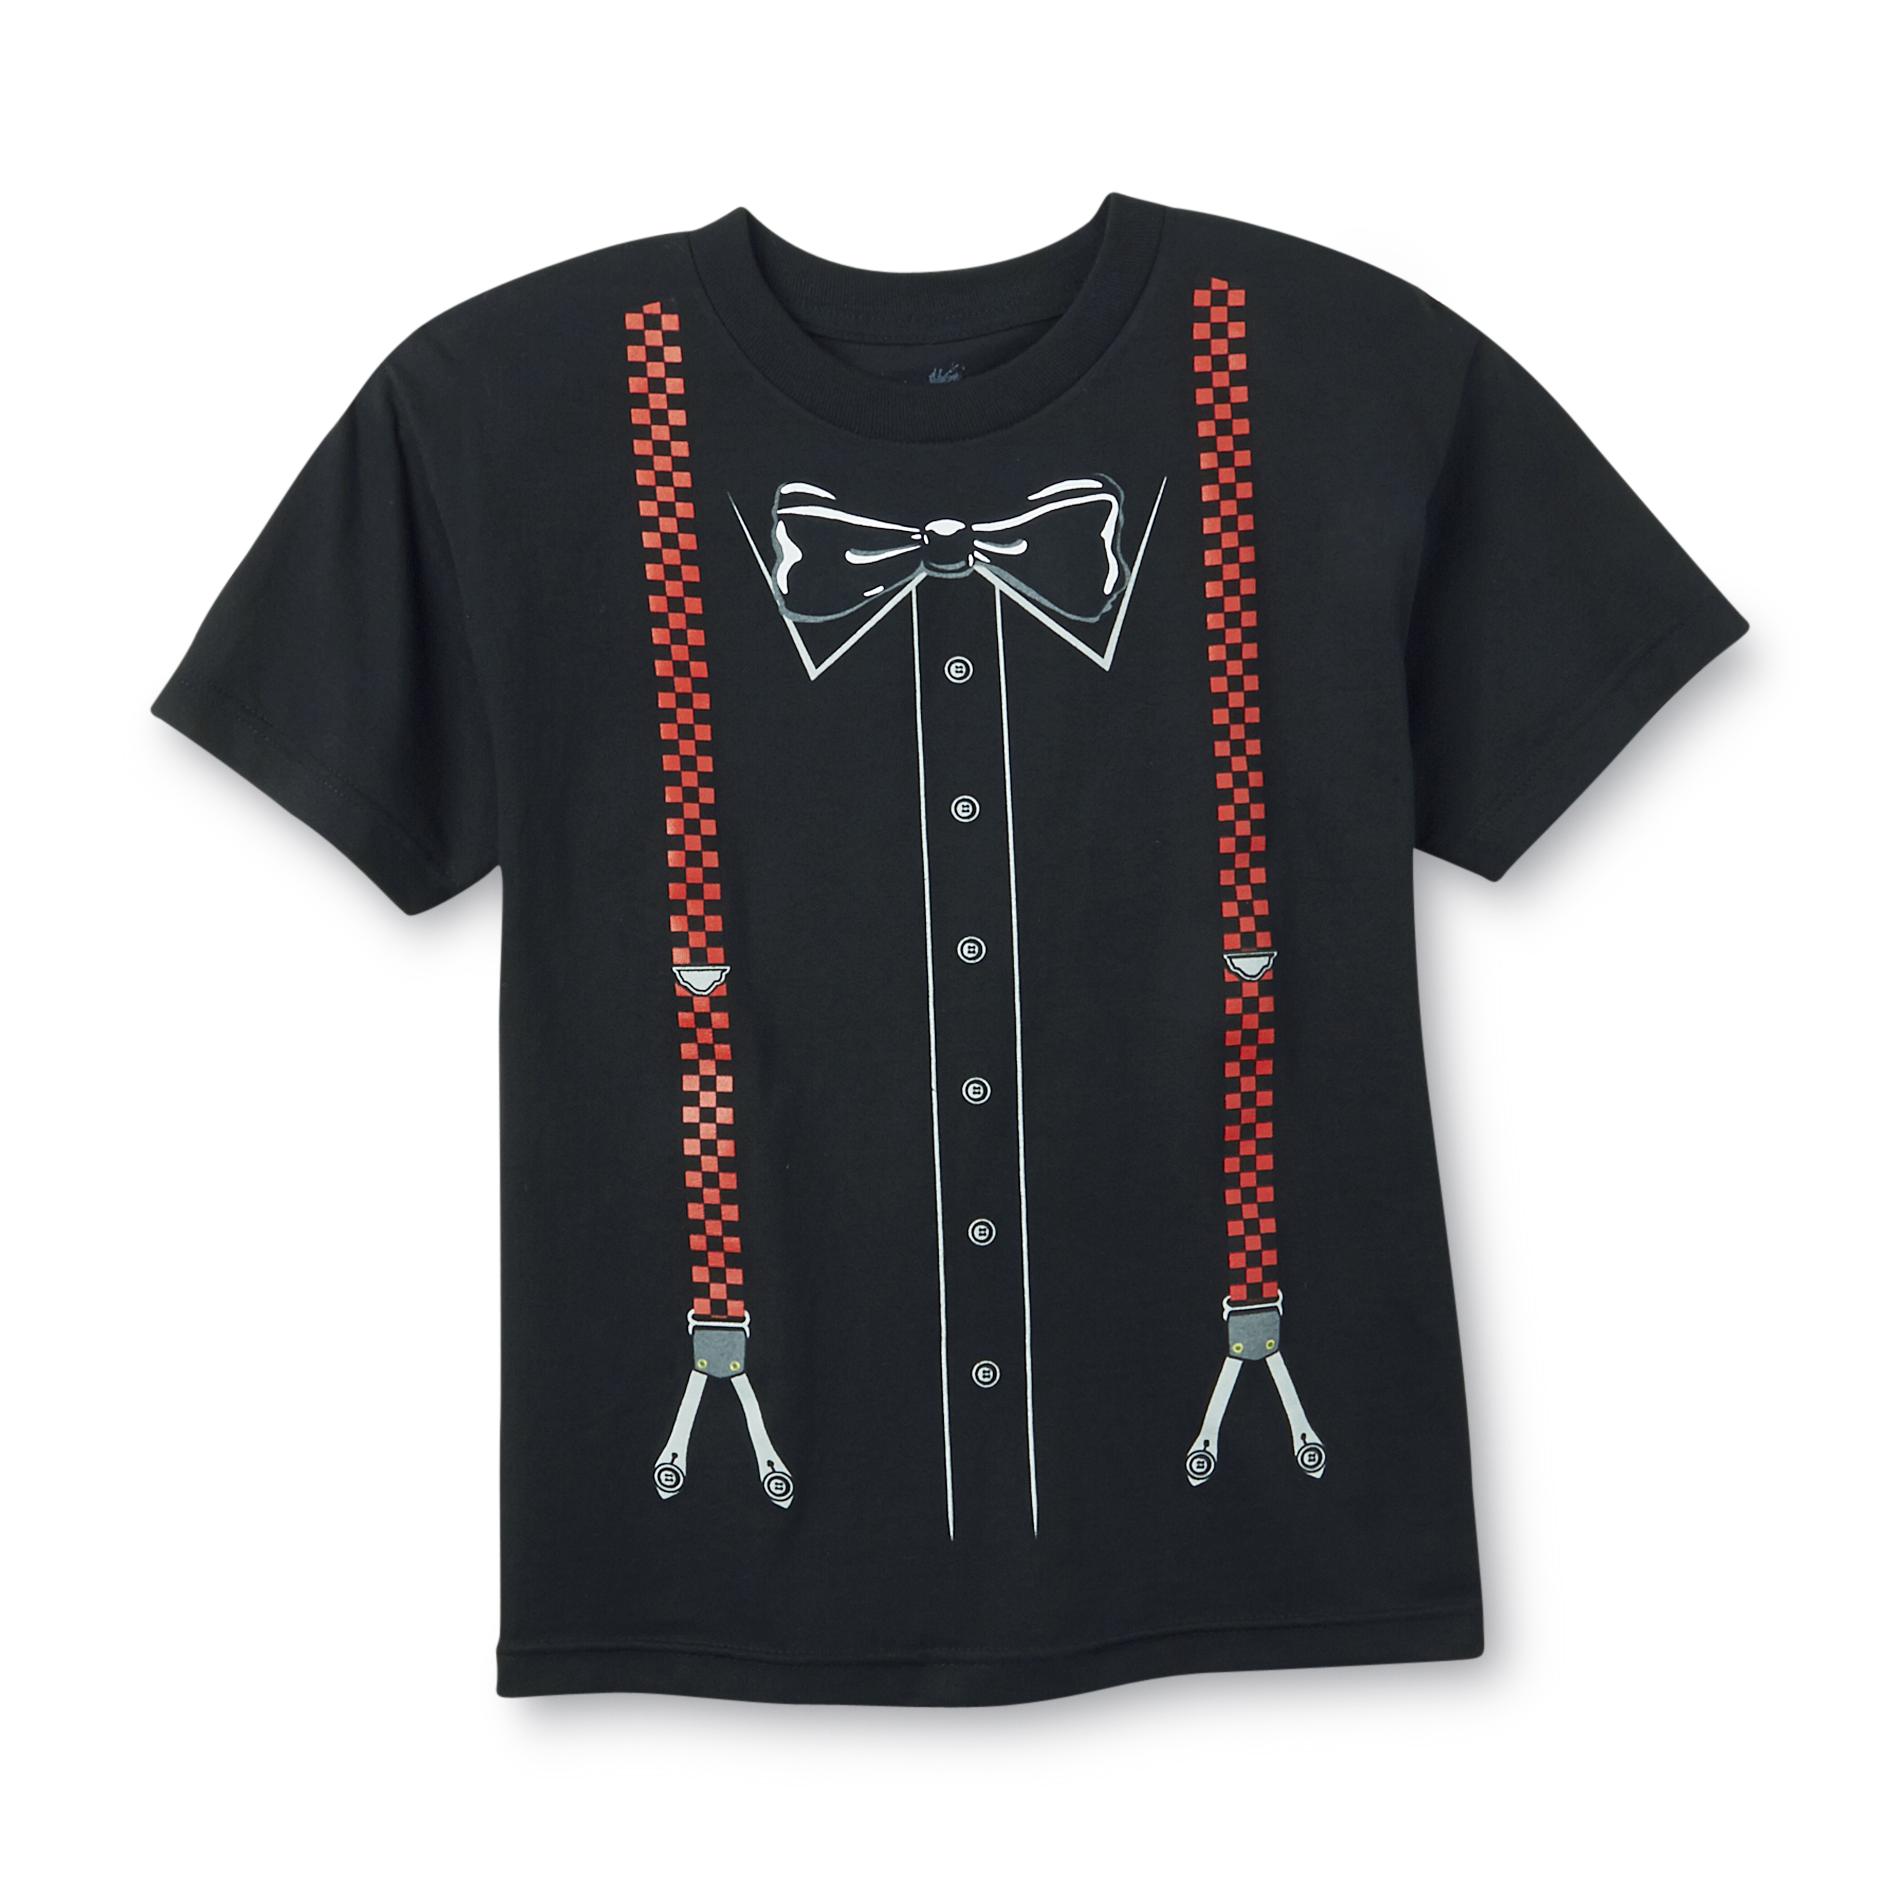 Infinite Visions Boy's Graphic T-Shirt - Bow Tie & Suspenders